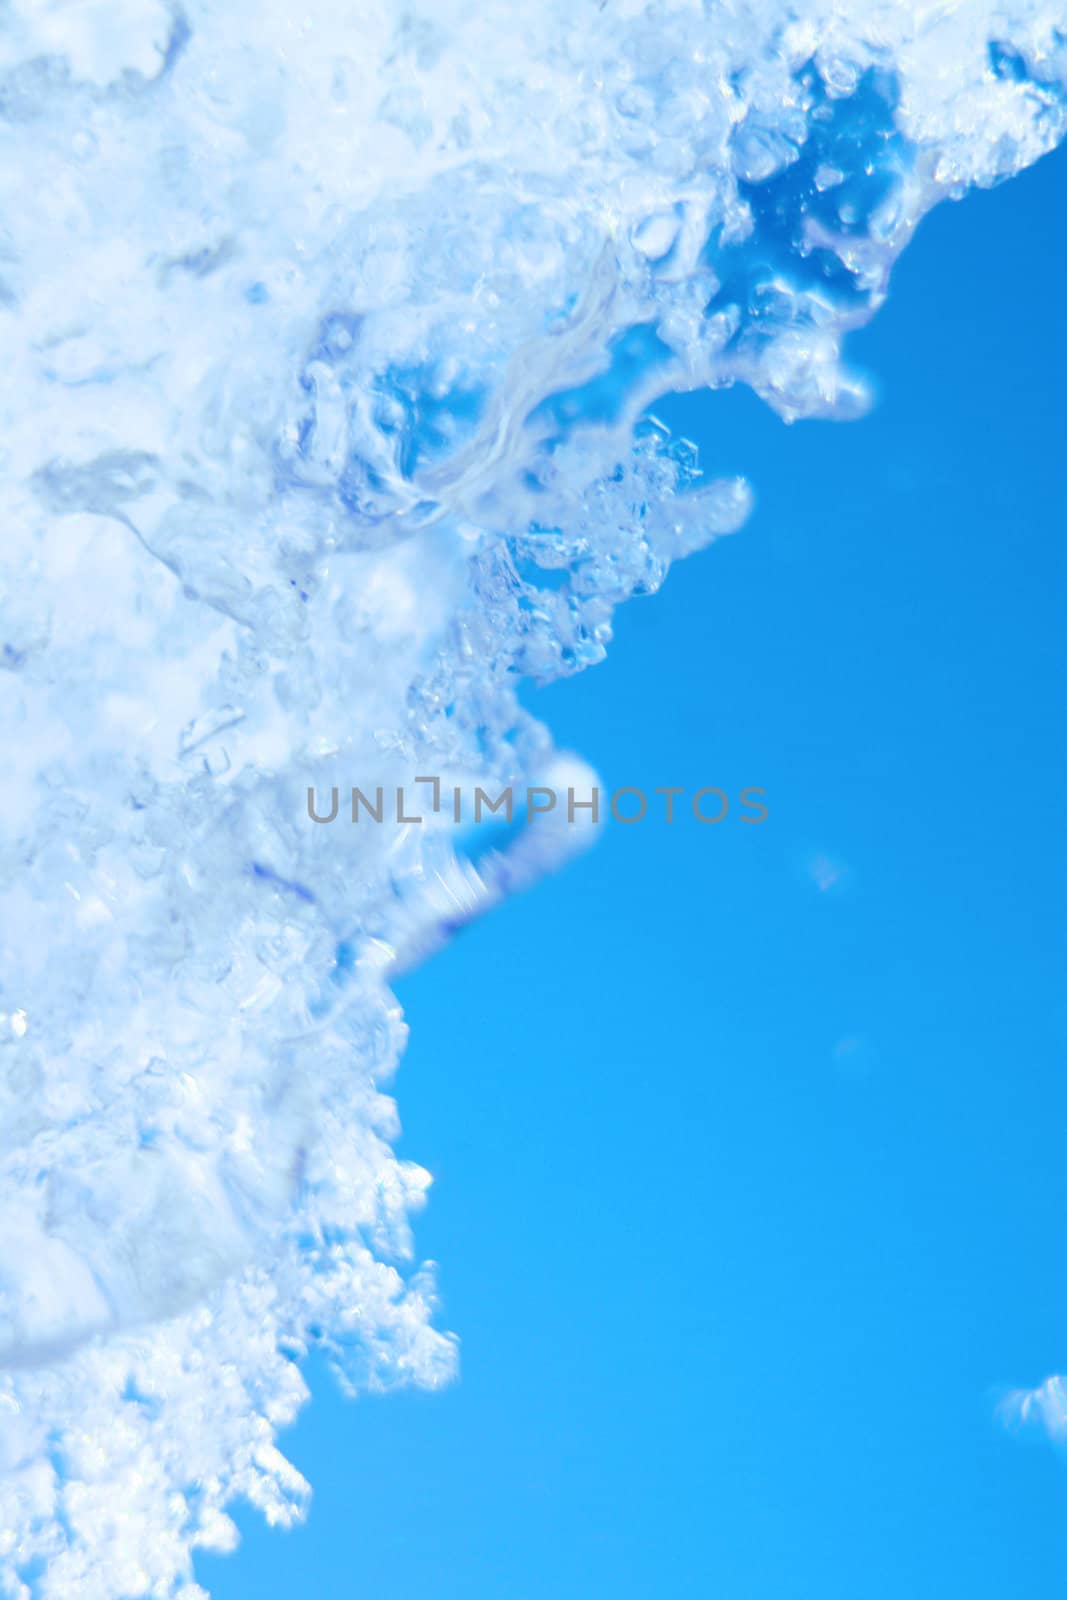 frozen water drops with blue background